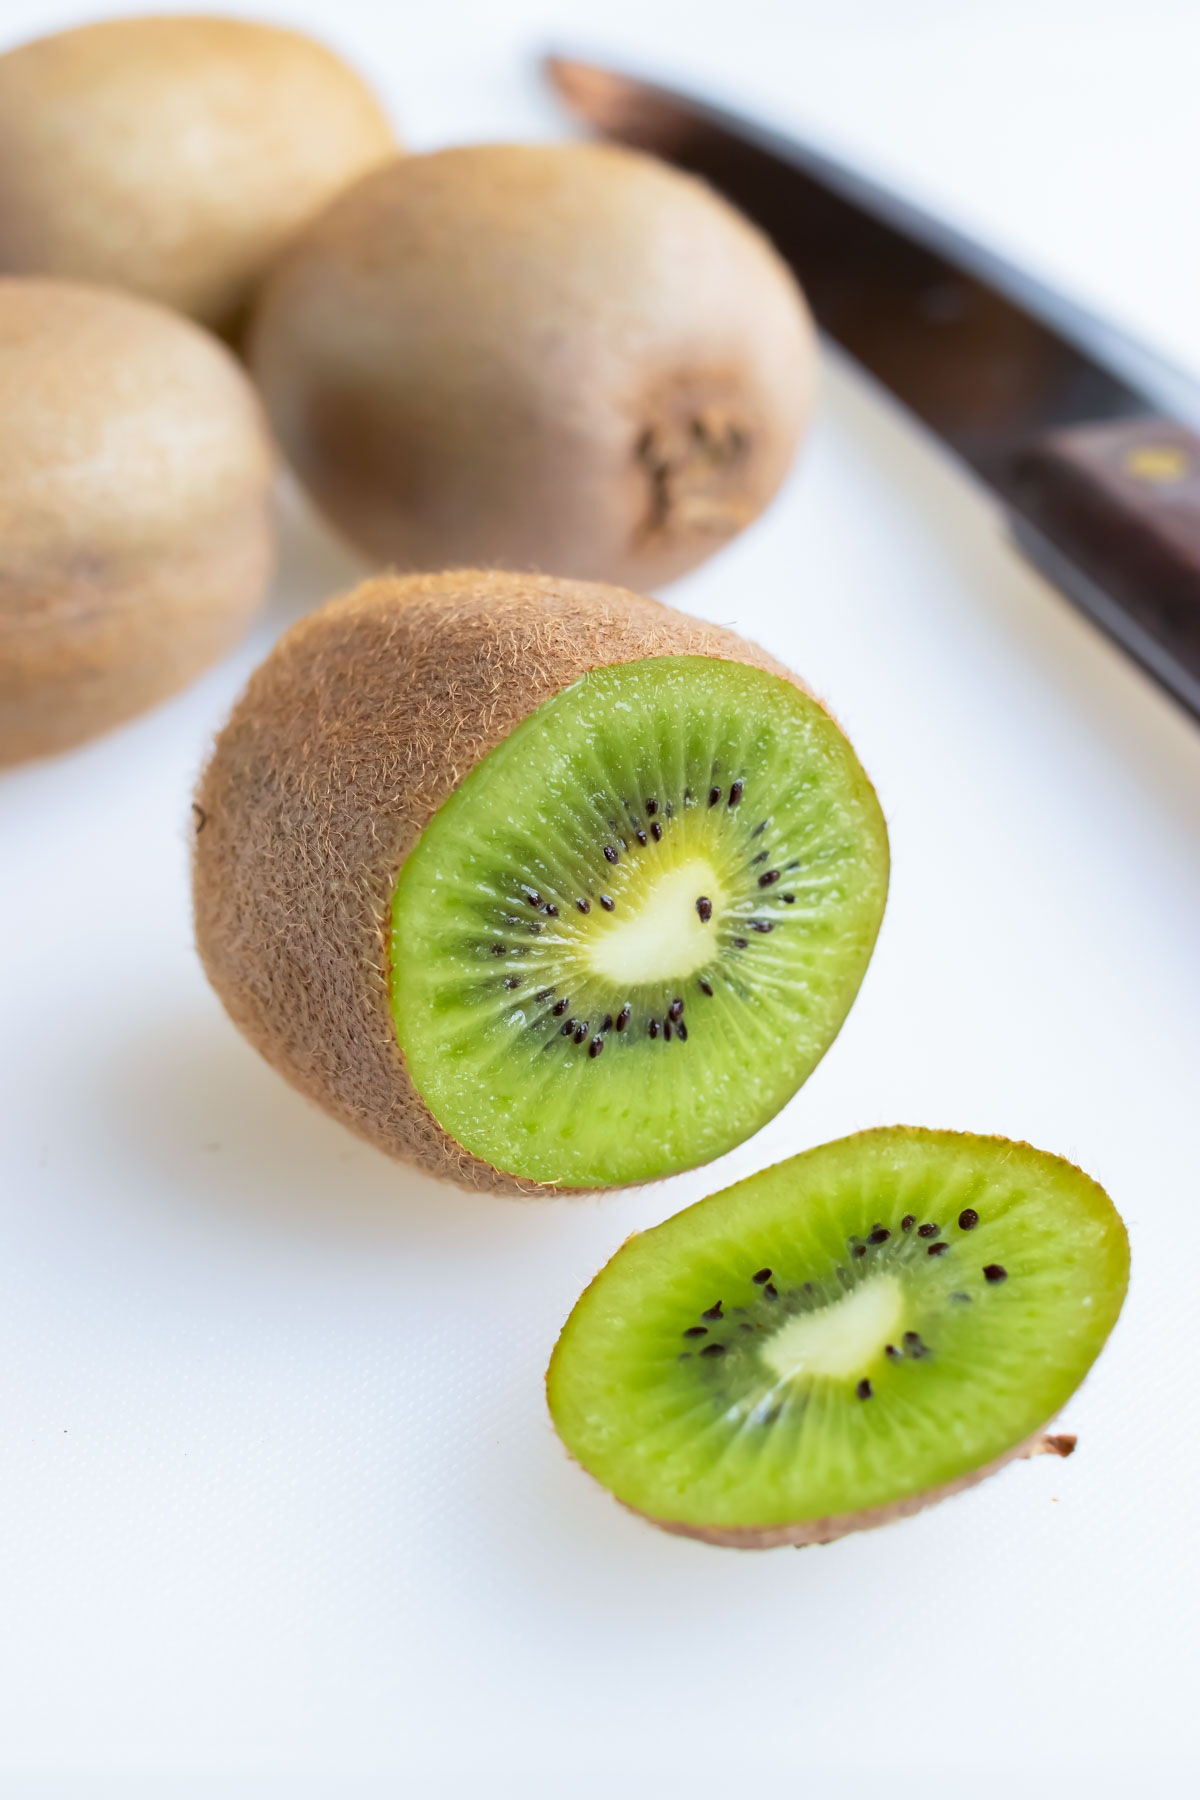 How To Cut A Kiwi: A Step-By-Step Guide